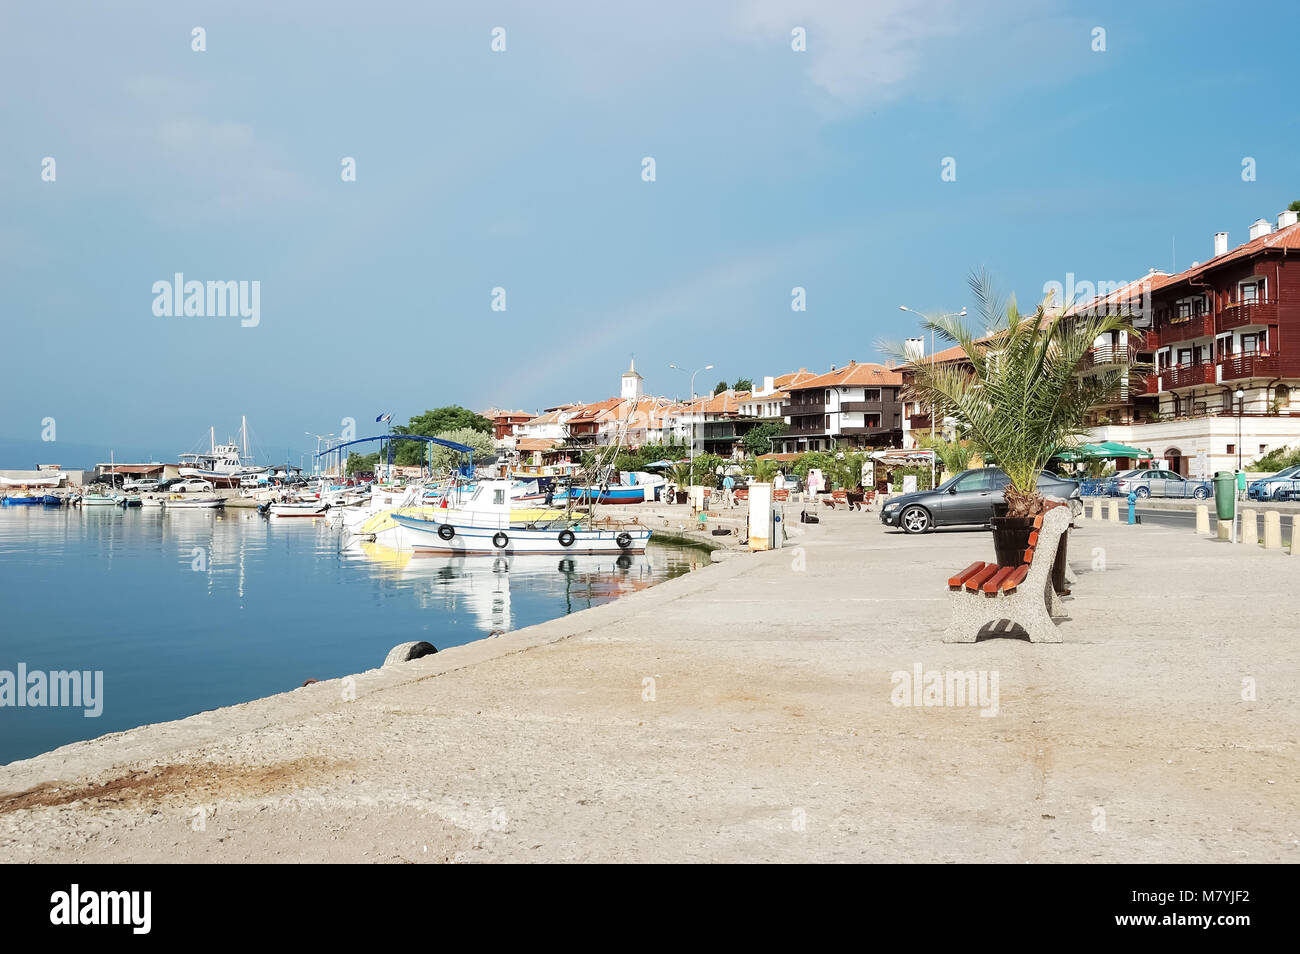 Nessebar, Bulgaria - June 12, 2011: View of the embankment and harbor of the old town of Nessebar with a rainbow, Sunny Beach, Black Sea coast of Bulg Stock Photo